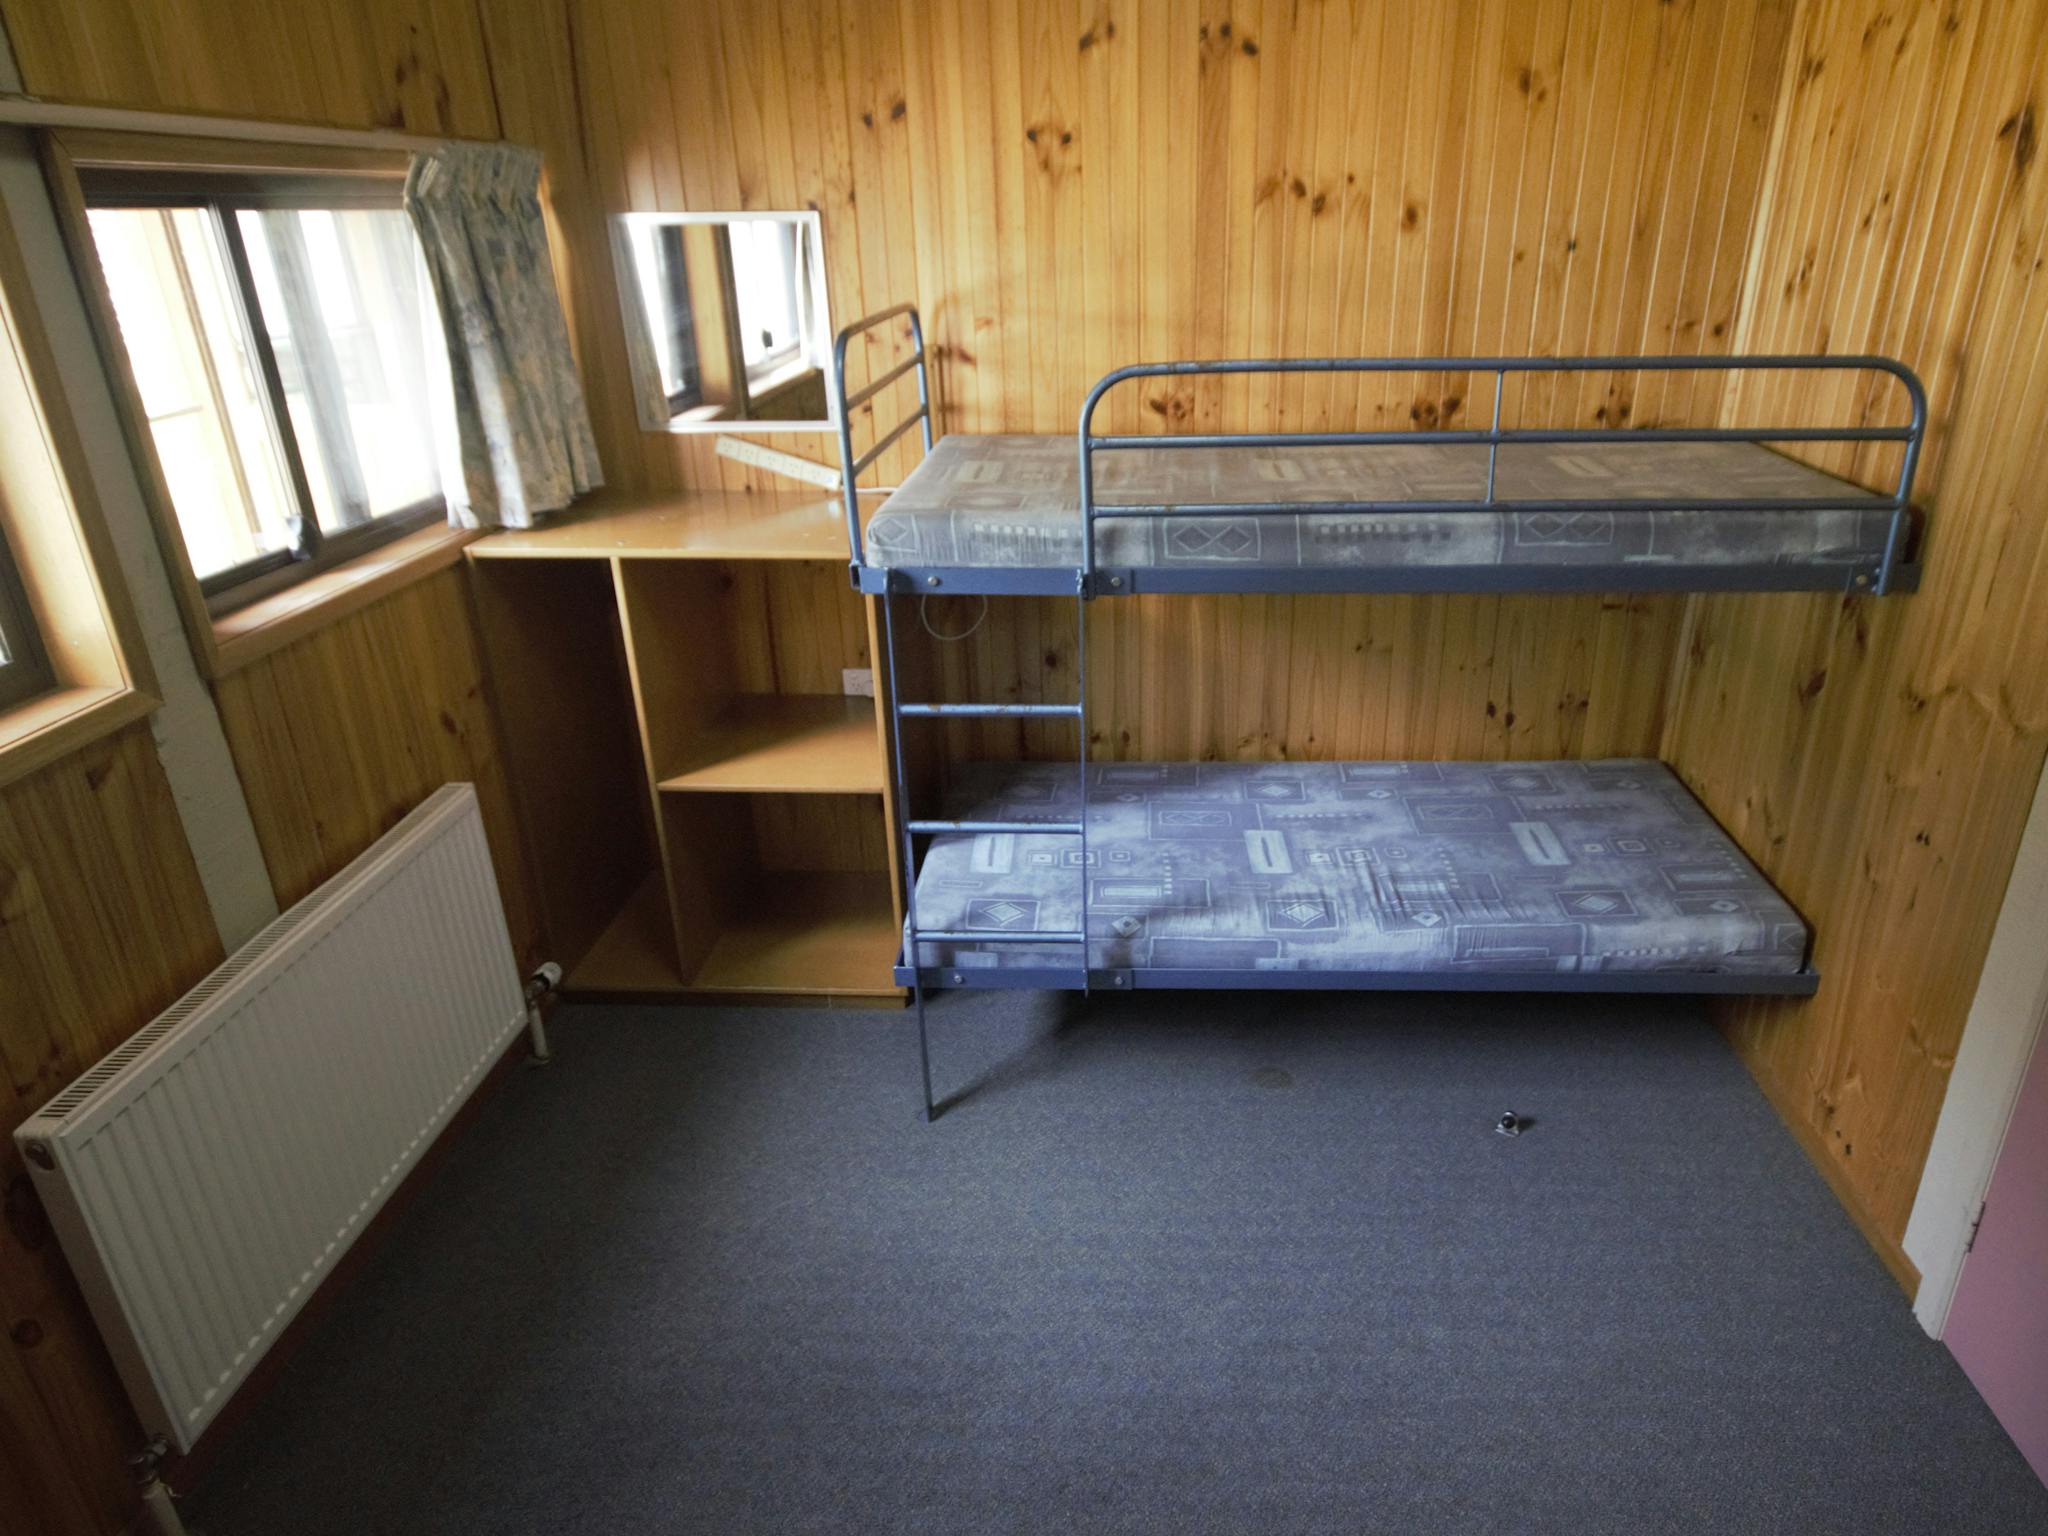 A Wing 2 bed room